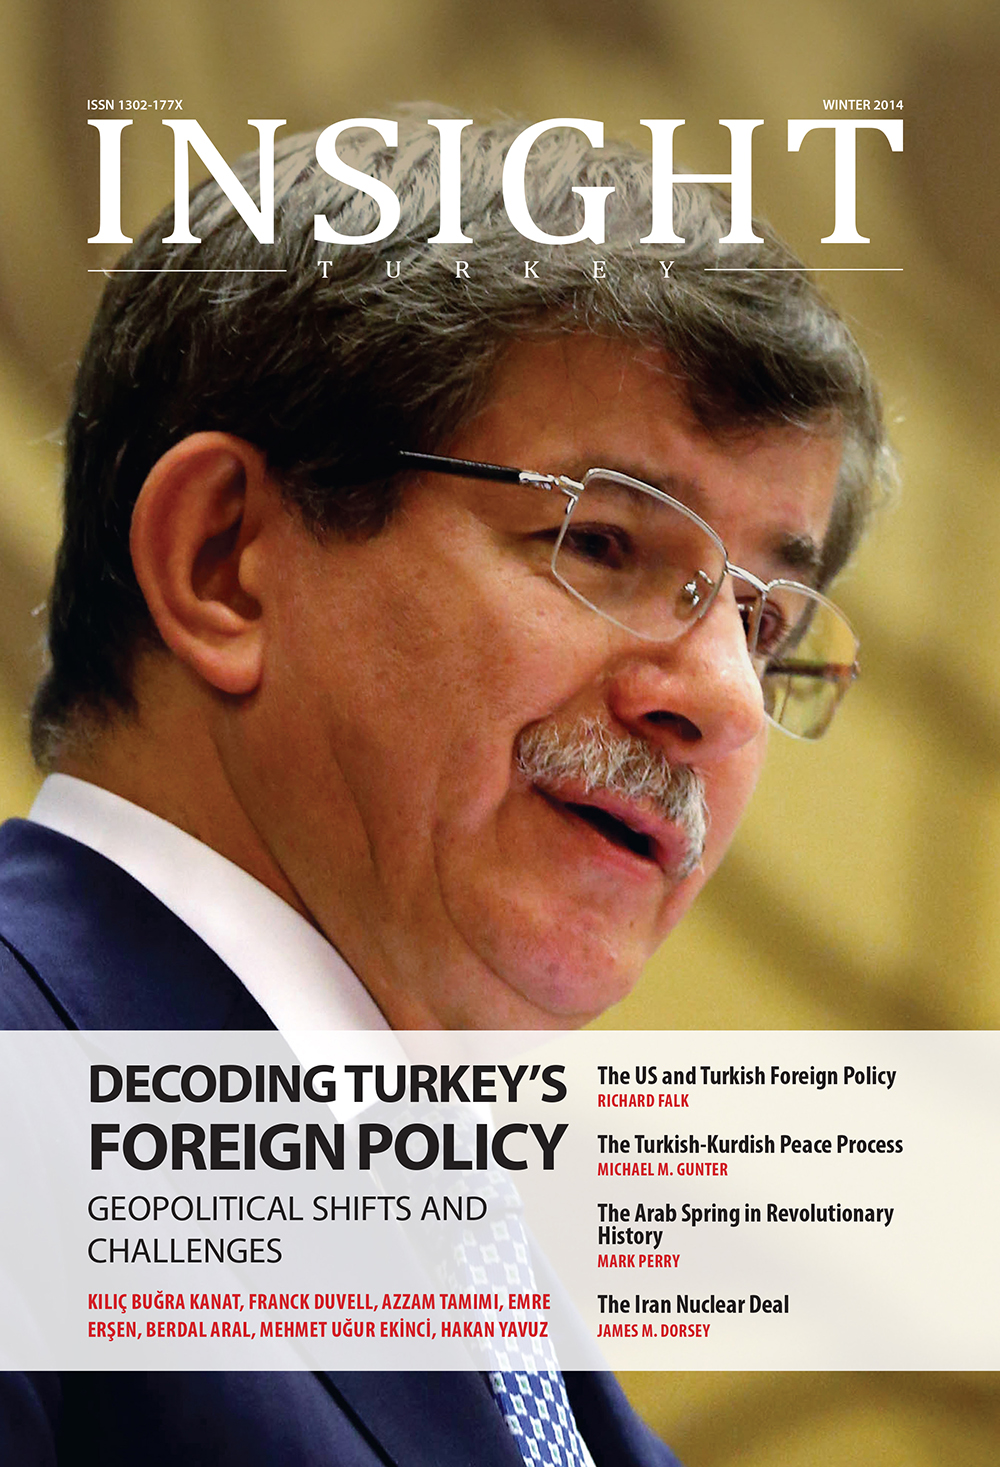 Decoding Turkey's Foreign Policy